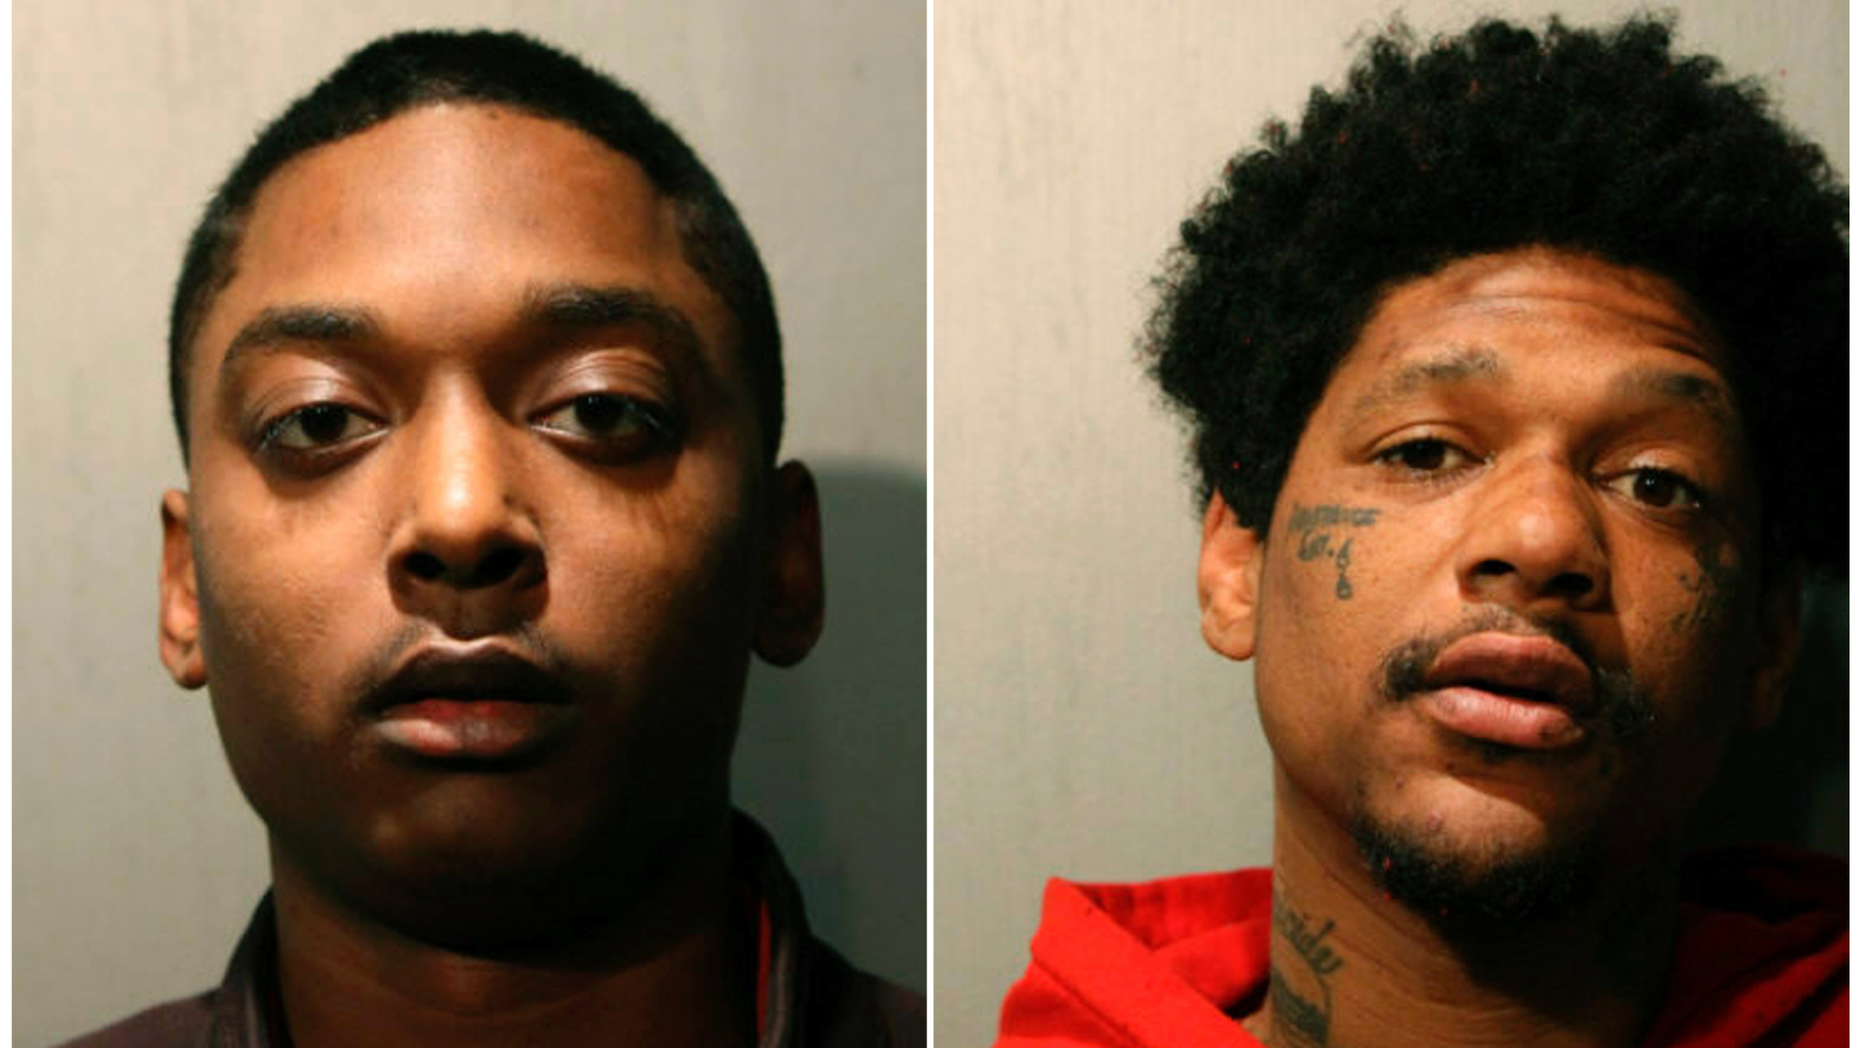 This combination of reservation photos published by the Chicago Police Service in March 2019 shows Menelik Jackson (left) and Jovan Battle. Both men are charged with first degree murder over the weekend killing a Chicago officer on leave who was repeatedly hit while sitting in a parked car. Chicago police announced on Monday (March 25th) that Jackson, of South Holland, and Battle of Chicago, were arrested for allegedly shooting at the car in the River North neighborhood, killing John Rivera. They are expected in court on Monday. (Chicago Police Department via AP)